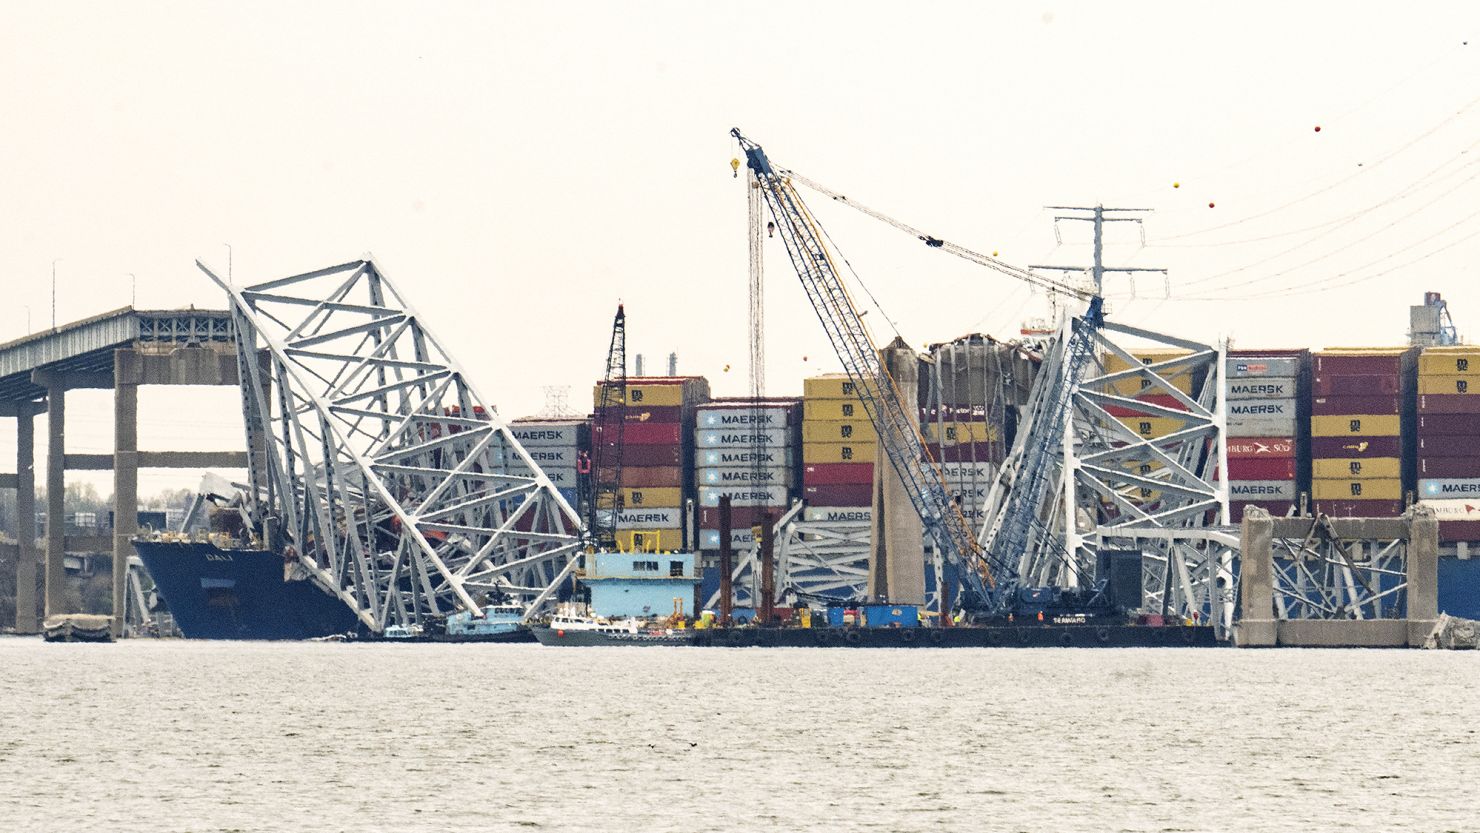 Cranes begin the cleanup of the collapsed Francis Scott Key Bridge and the container ship Dali in Baltimore on March 30.